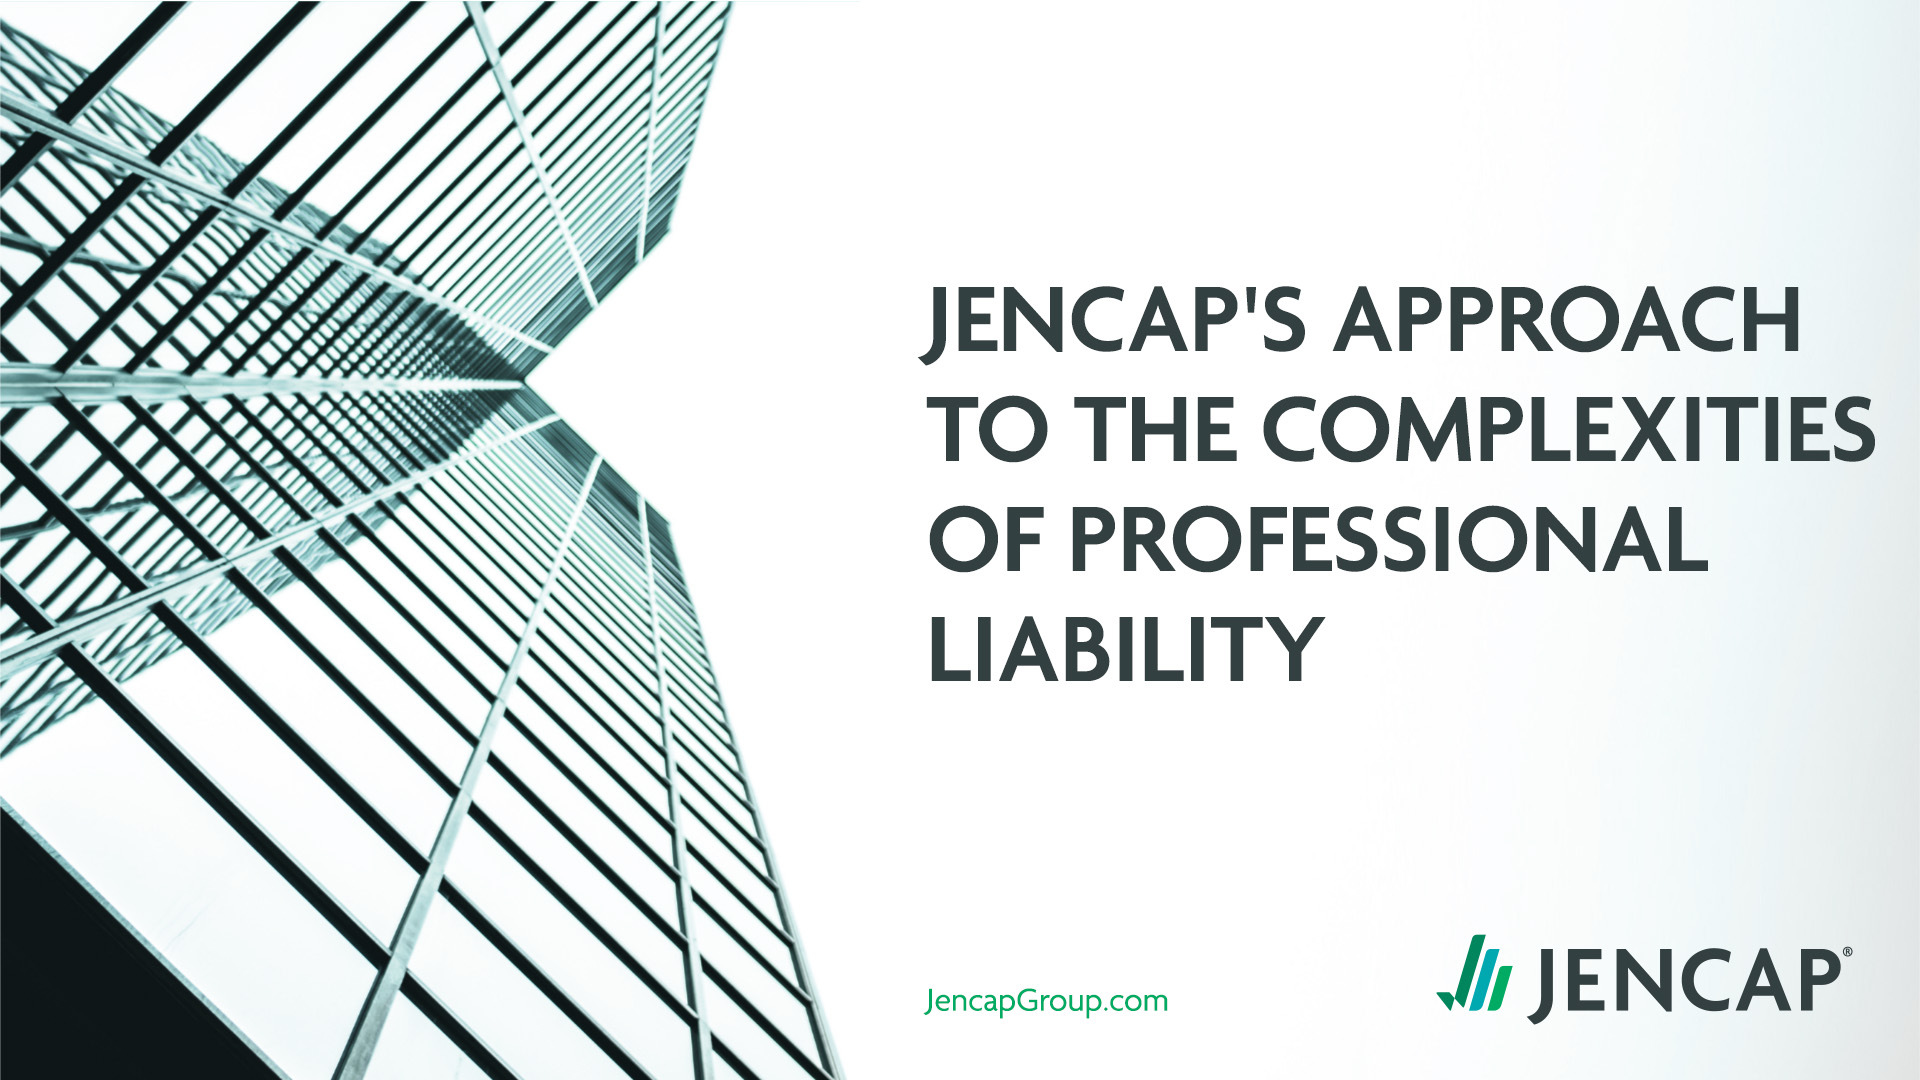 Jencap's Approach to the Complexities of Professional Liability